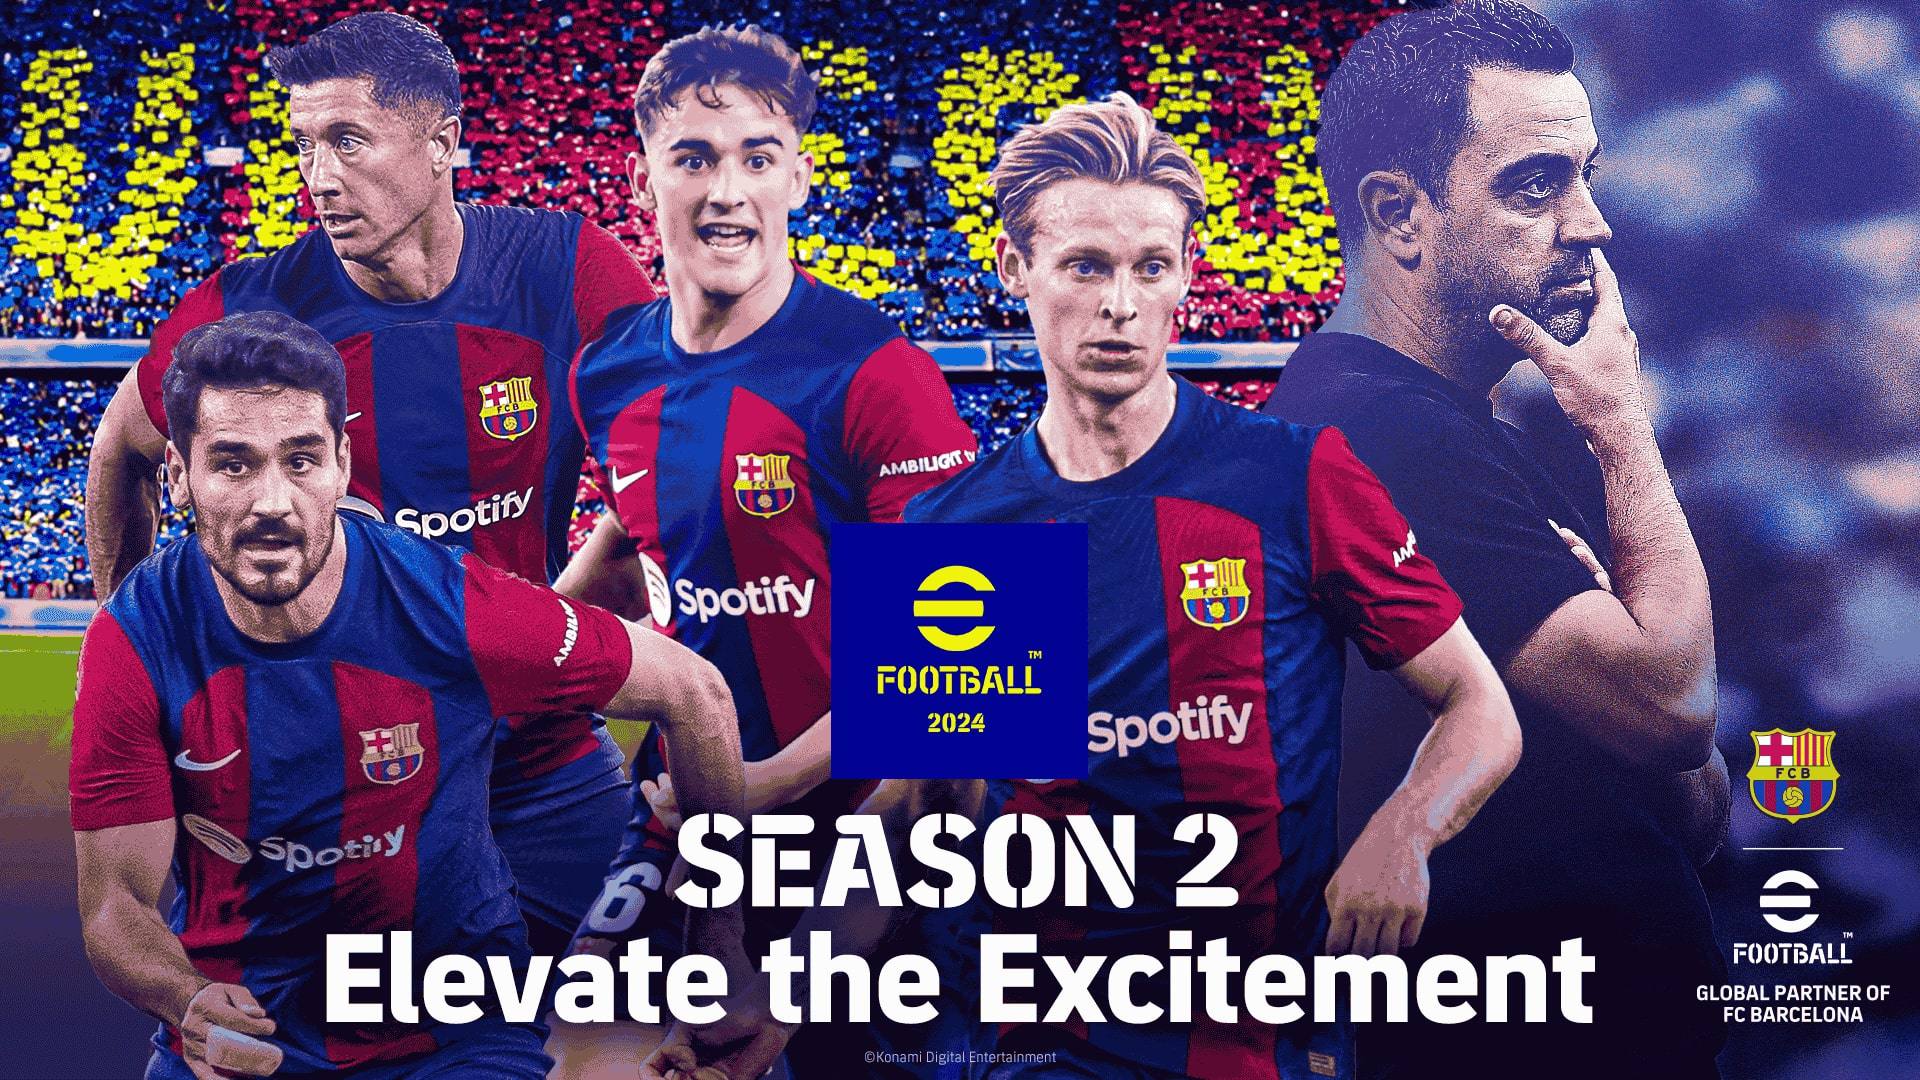 Barcelona FC's Dream Team elevates the exertion in eFootball 2024 Season 2 with new packs.